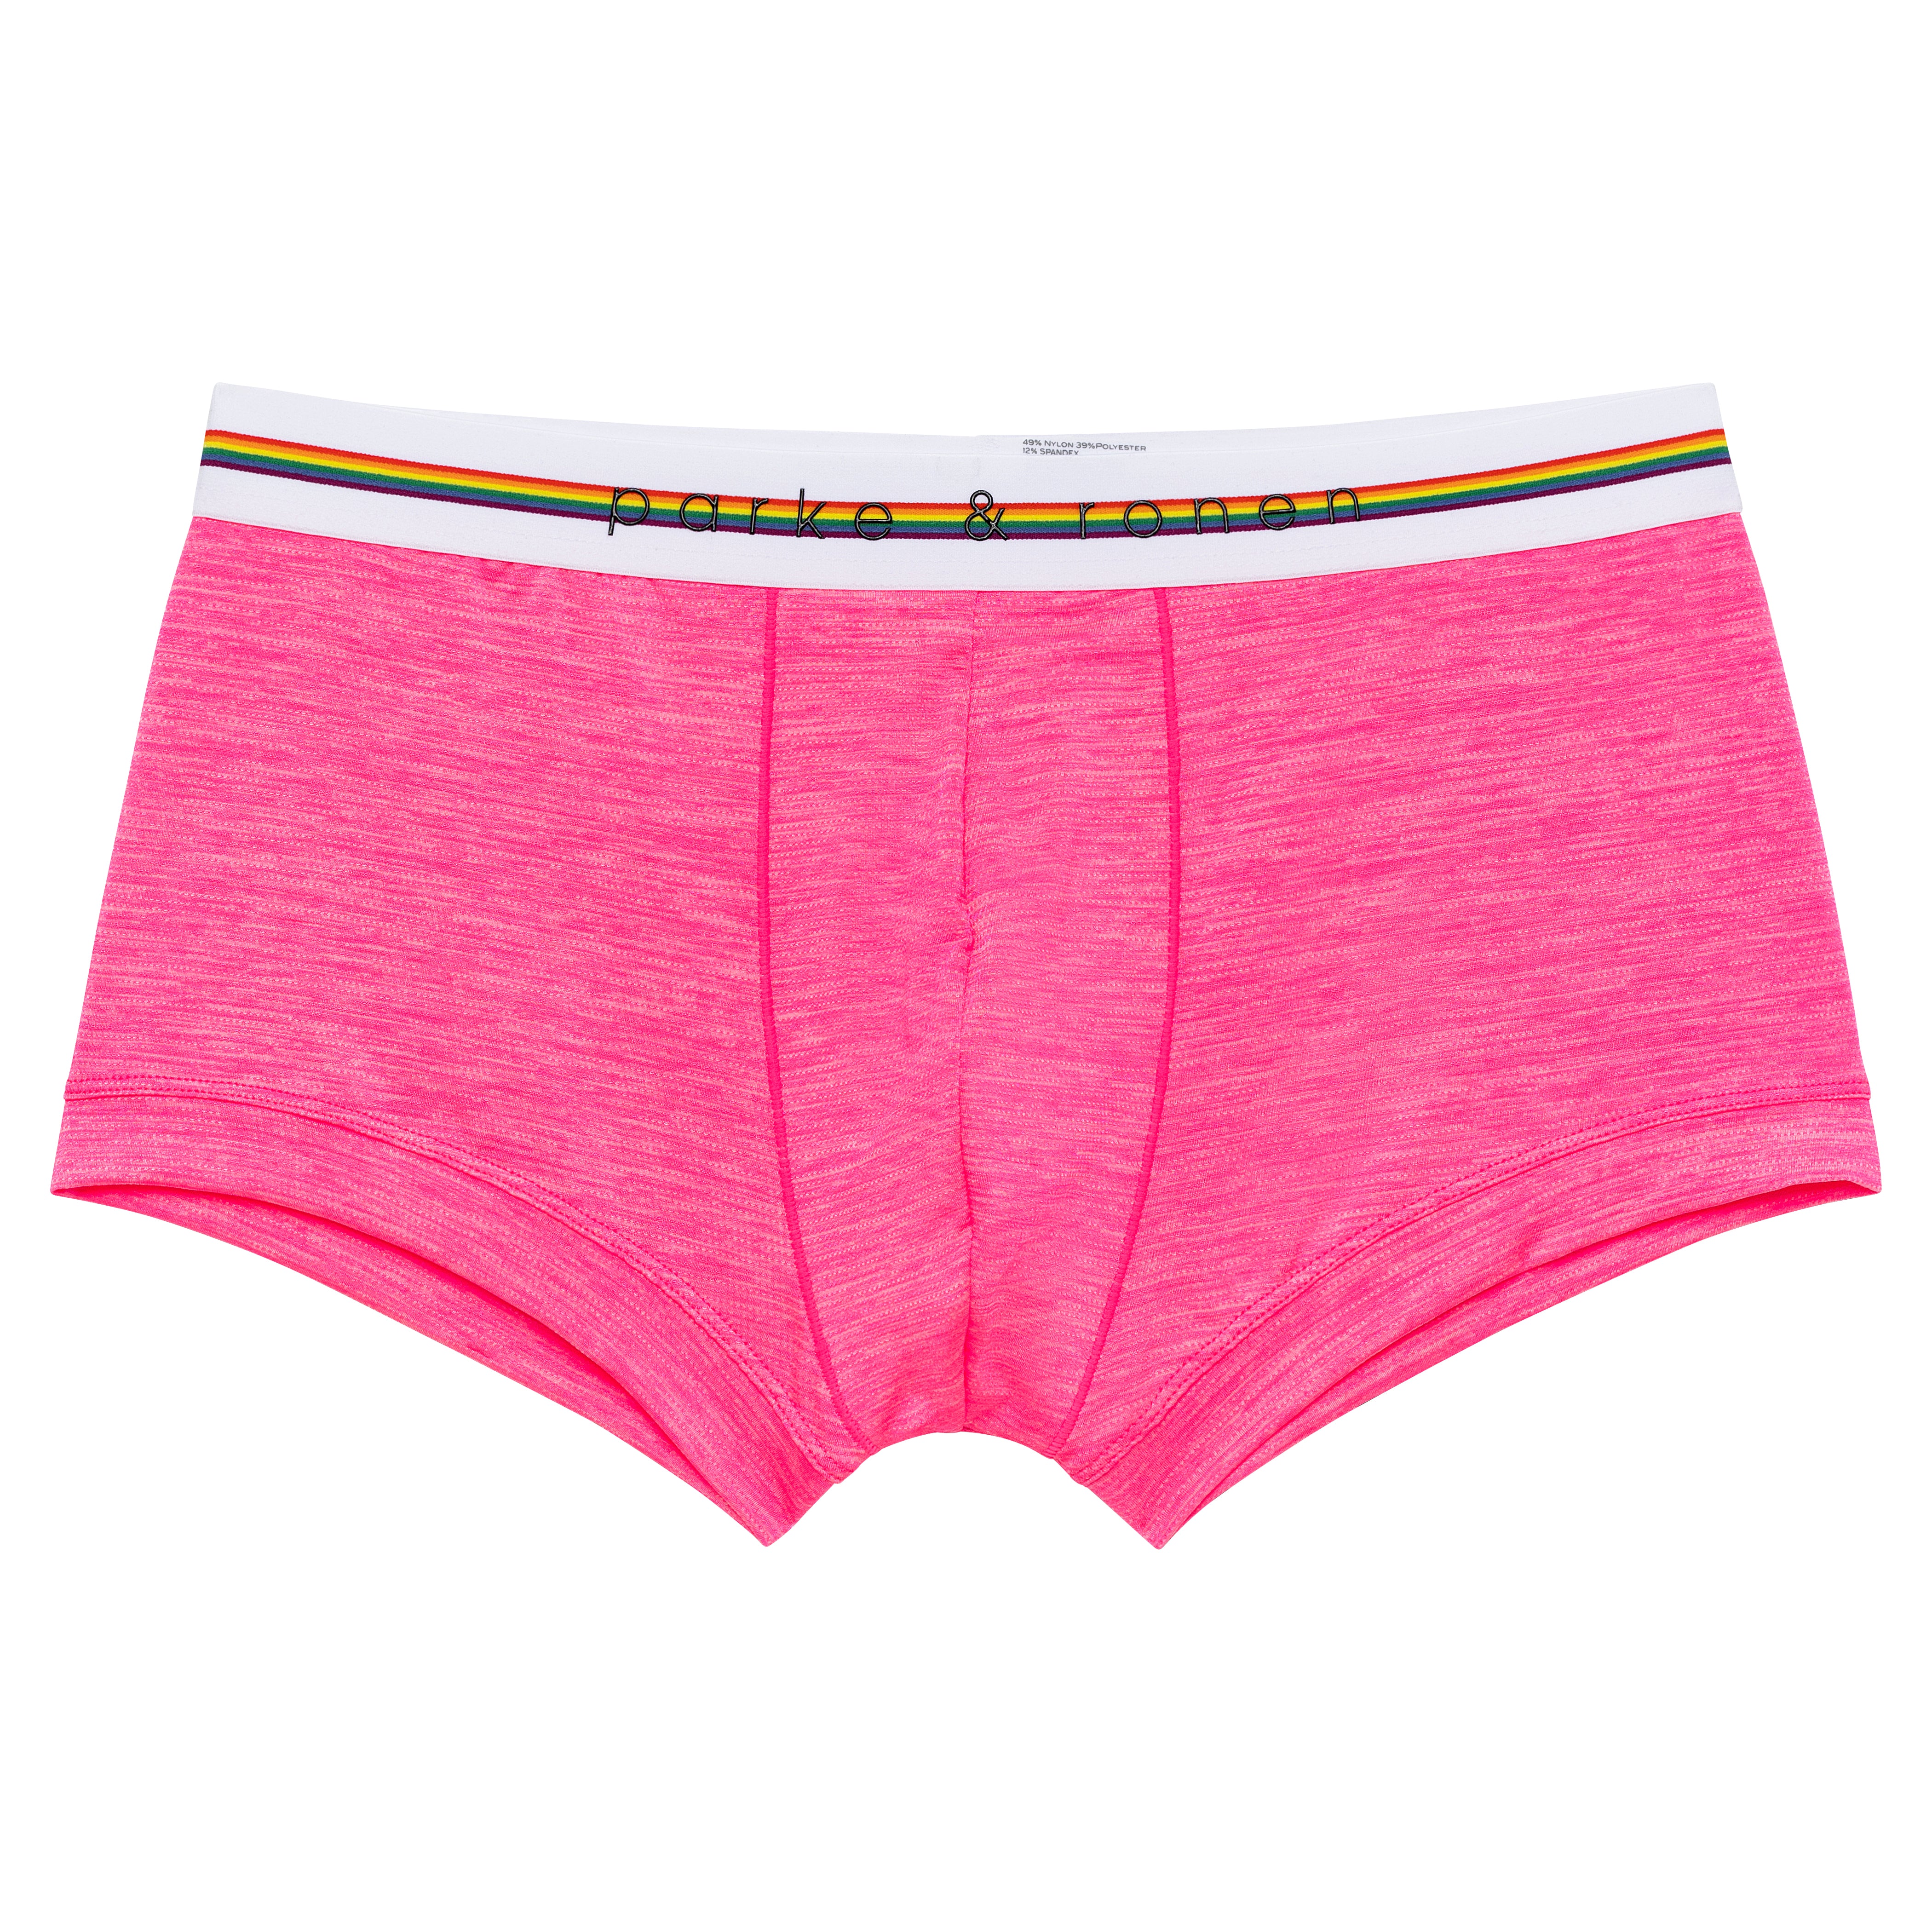 LIMITED PRIDE EDITION- Barbie Pink Heather Mesh Low Rise Trunk